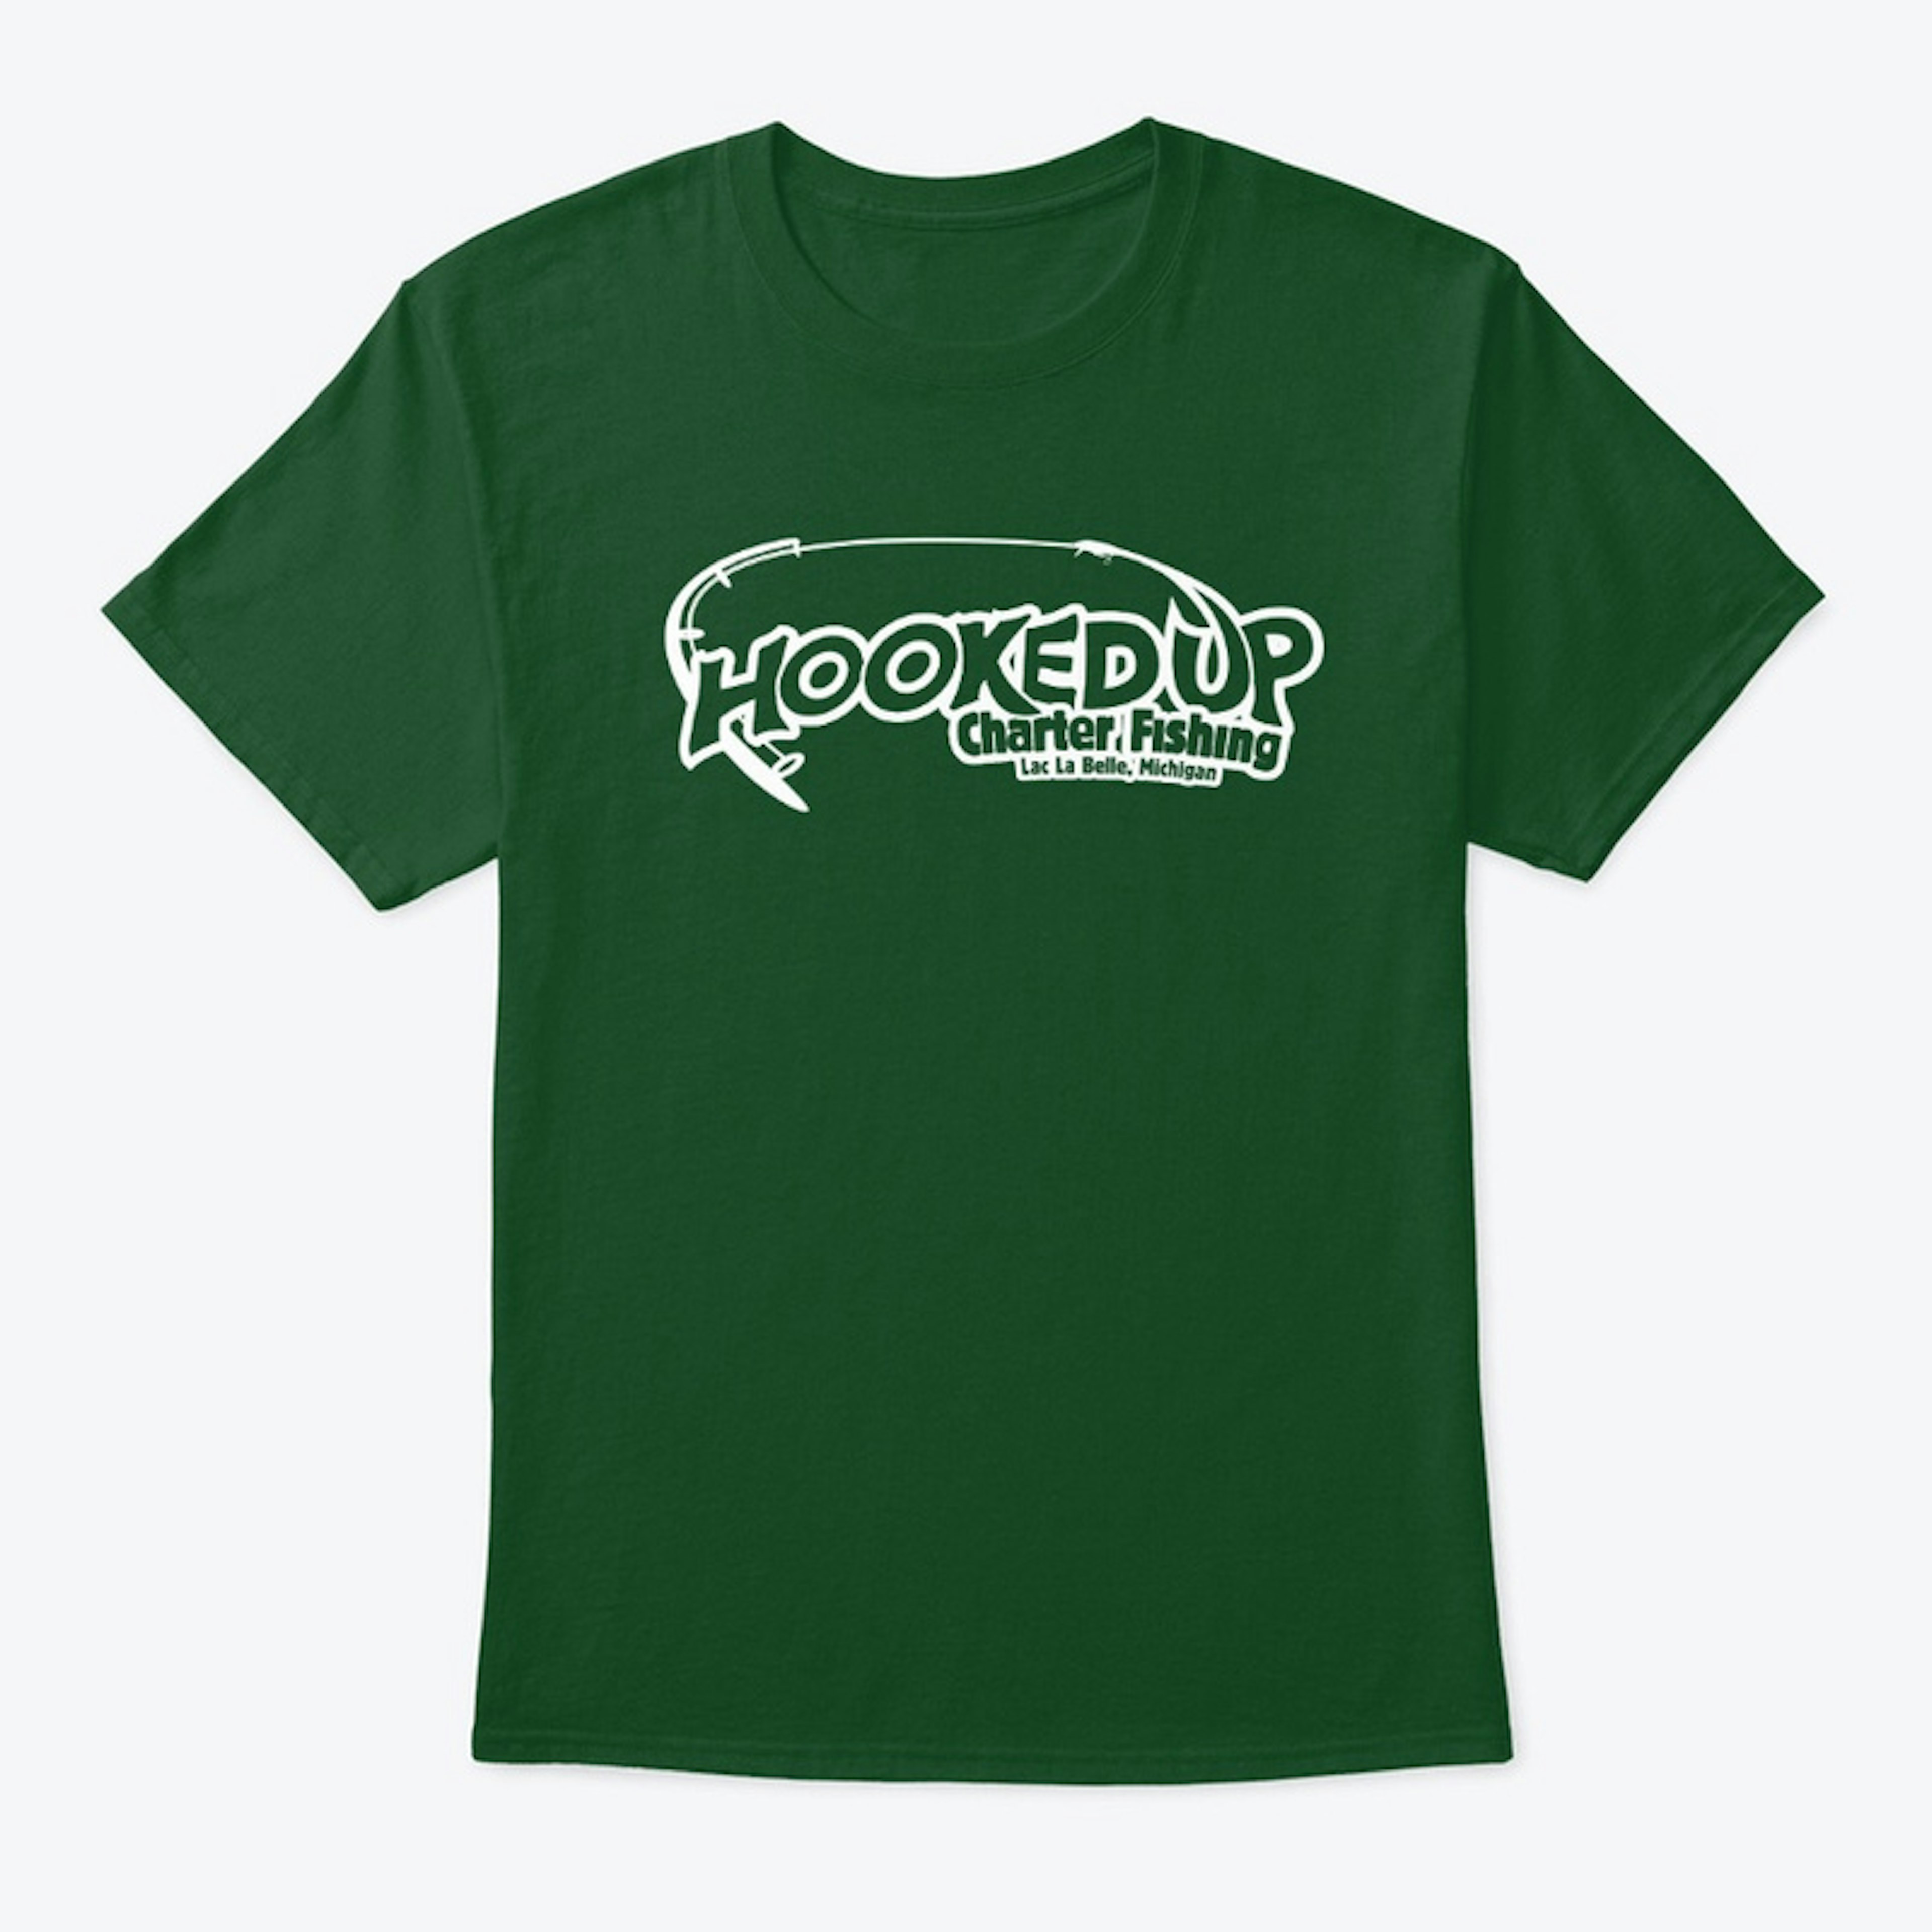 Hooked UP Charter Tee White Logo